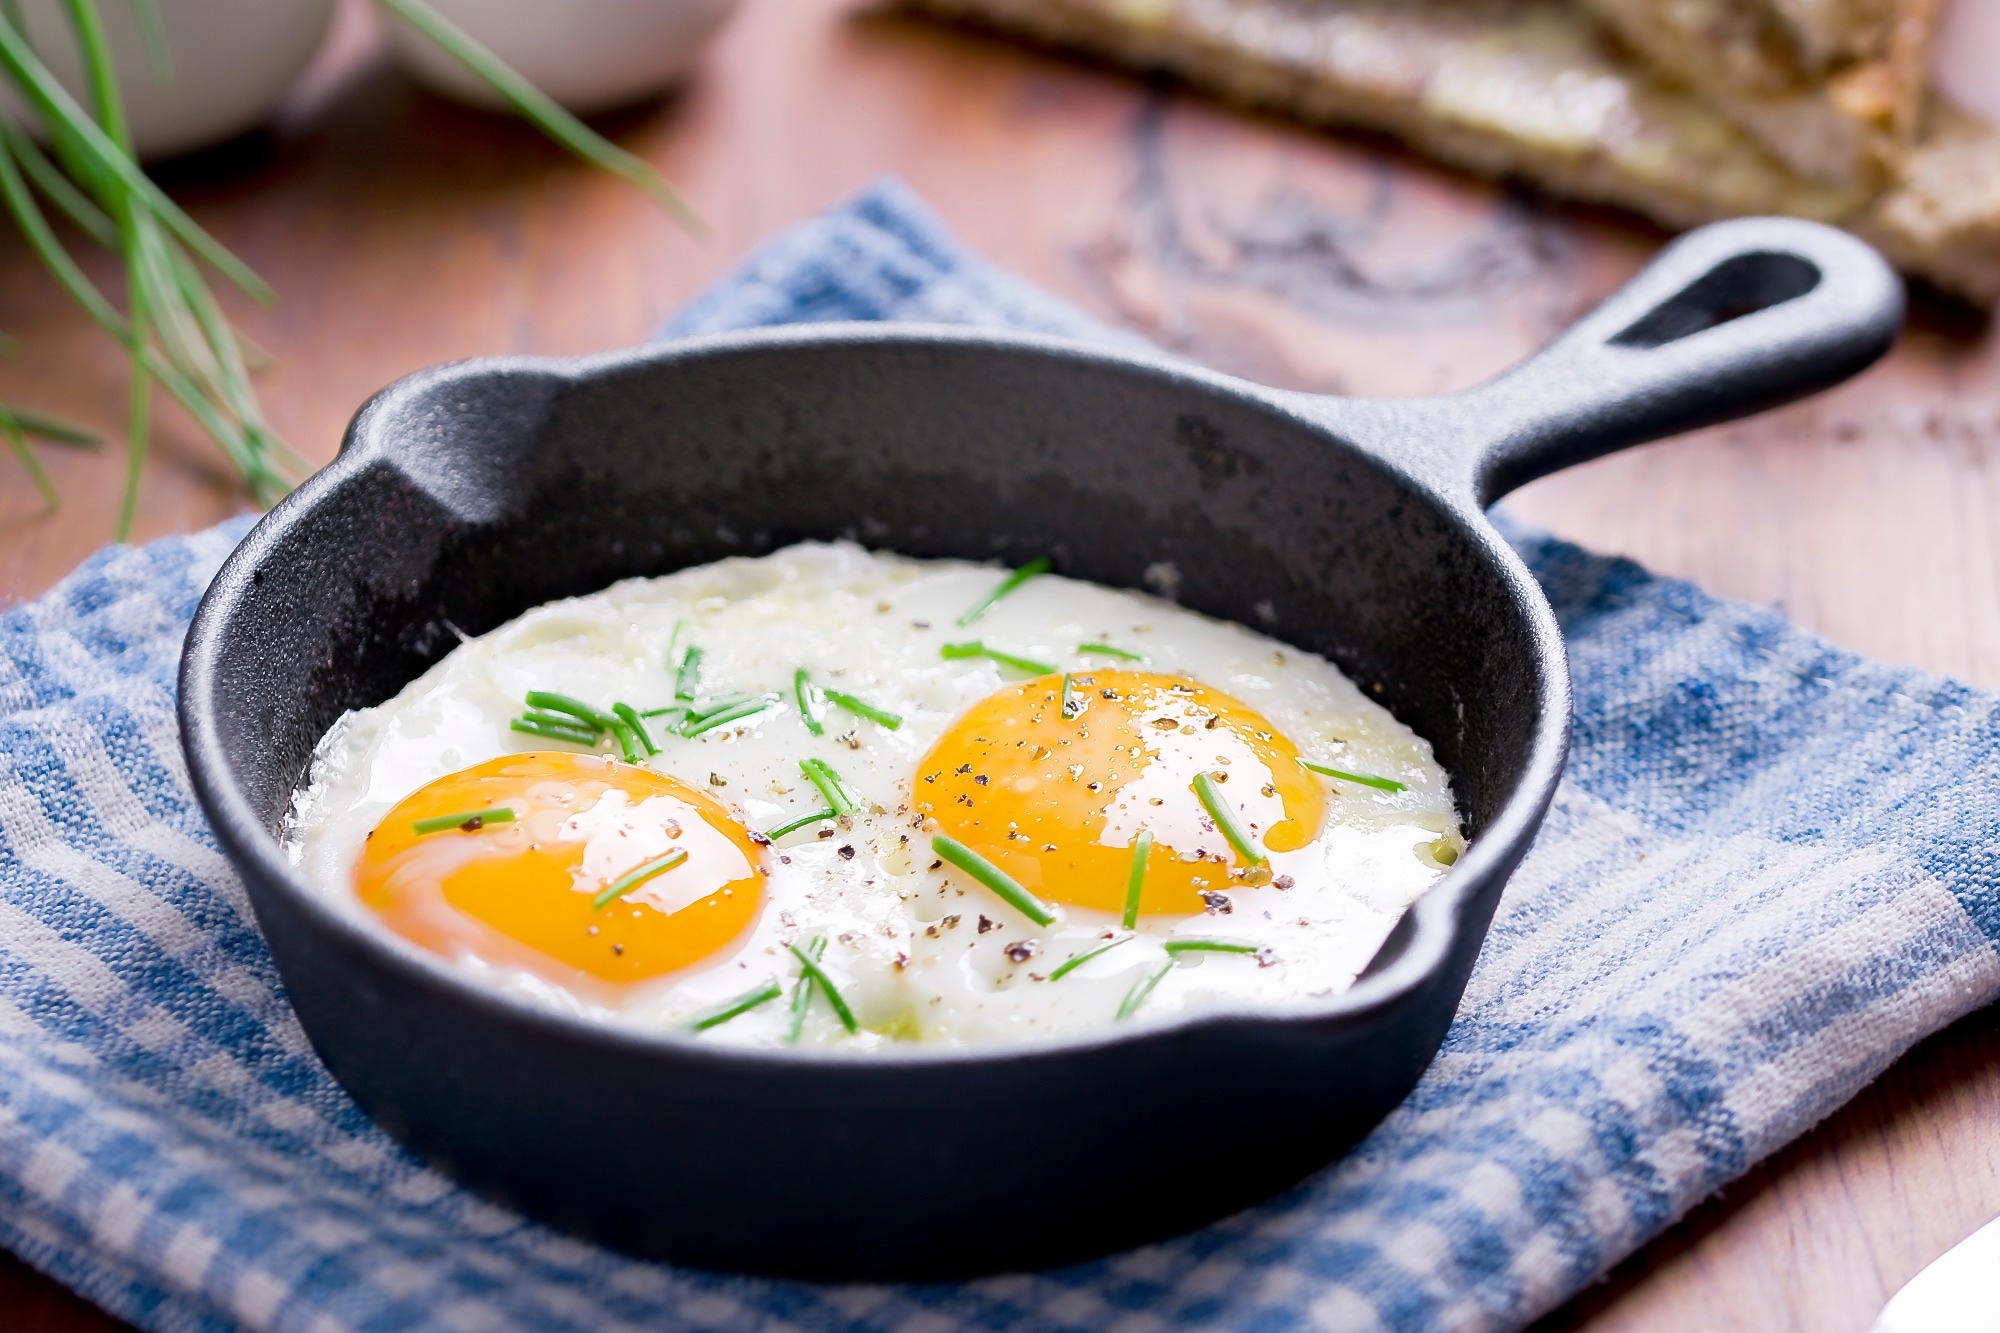 Study: Impact of a Low-Carbohydrate Compared with Low-Fat Breakfast on Blood Glucose Control in Type 2 Diabetes: A Randomized Trial. Image Credit: Patrycja St / Shutterstock.com